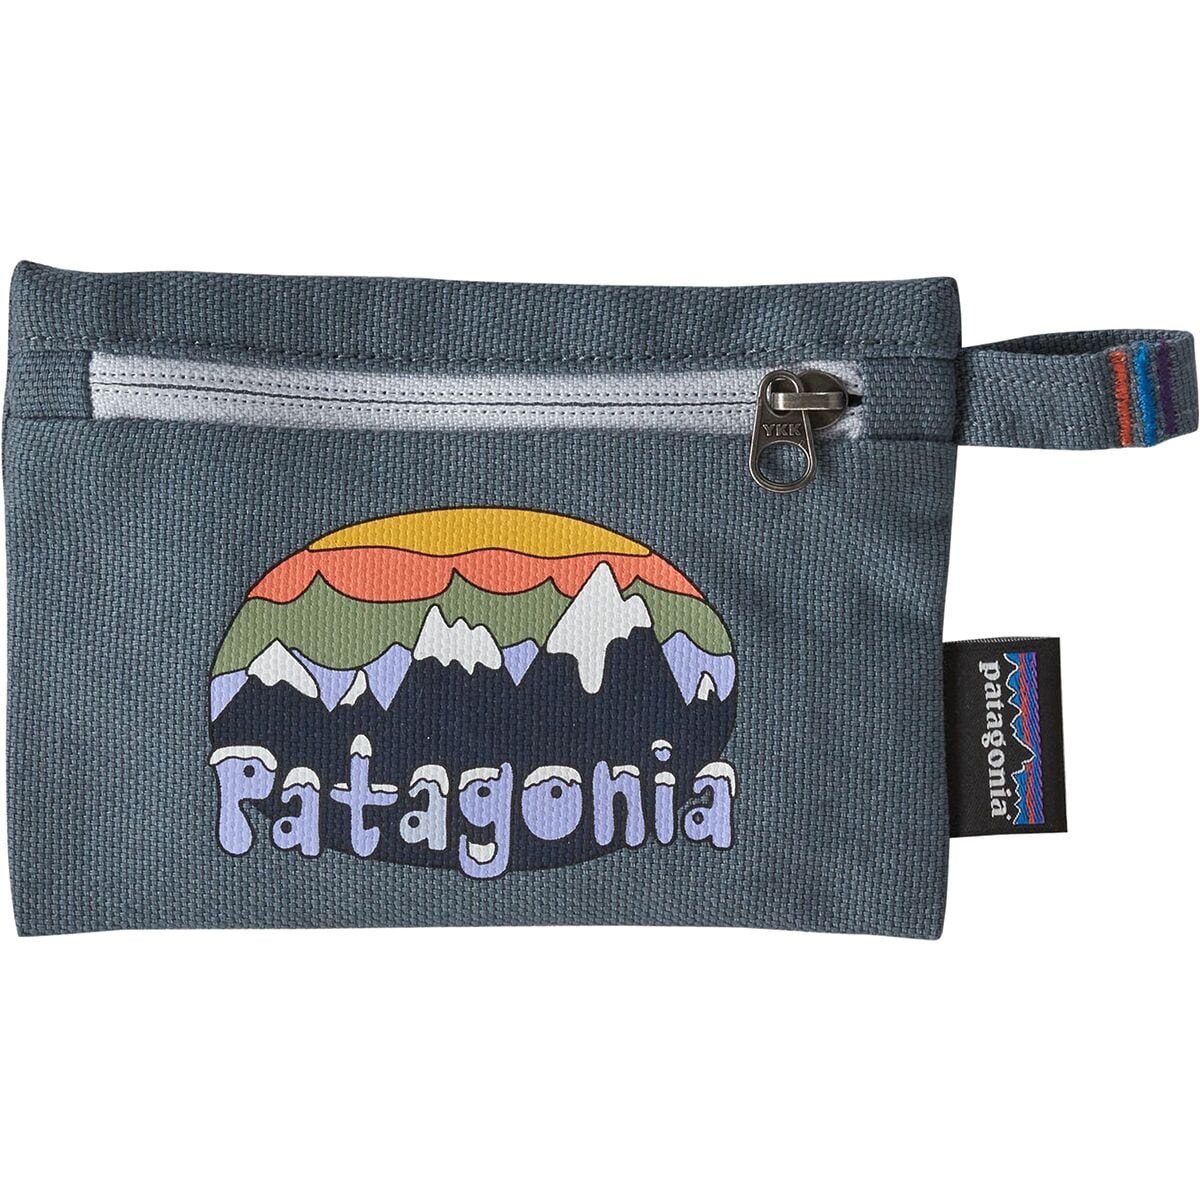 Patagonia Small Zippered Pouch - Accessories